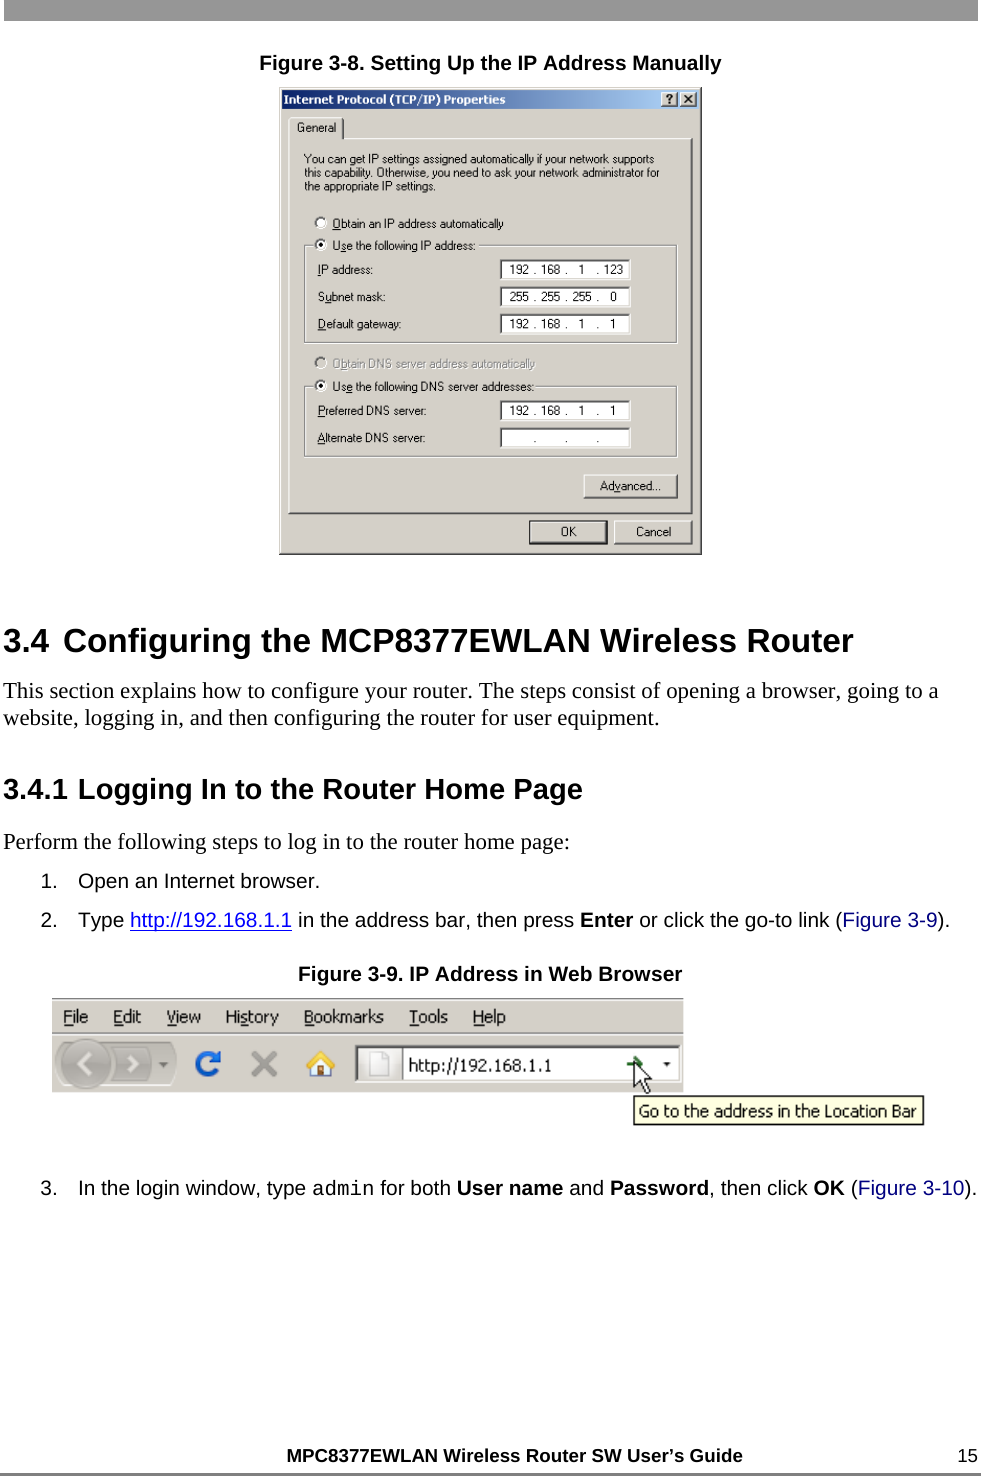                                                          MPC8377EWLAN Wireless Router SW User’s Guide    15 Figure 3-8. Setting Up the IP Address Manually  3.4 Configuring the MCP8377EWLAN Wireless Router This section explains how to configure your router. The steps consist of opening a browser, going to a website, logging in, and then configuring the router for user equipment. 3.4.1 Logging In to the Router Home Page Perform the following steps to log in to the router home page: 1.  Open an Internet browser. 2. Type http://192.168.1.1 in the address bar, then press Enter or click the go-to link (Figure 3-9). Figure 3-9. IP Address in Web Browser  3.  In the login window, type admin for both User name and Password, then click OK (Figure 3-10). 